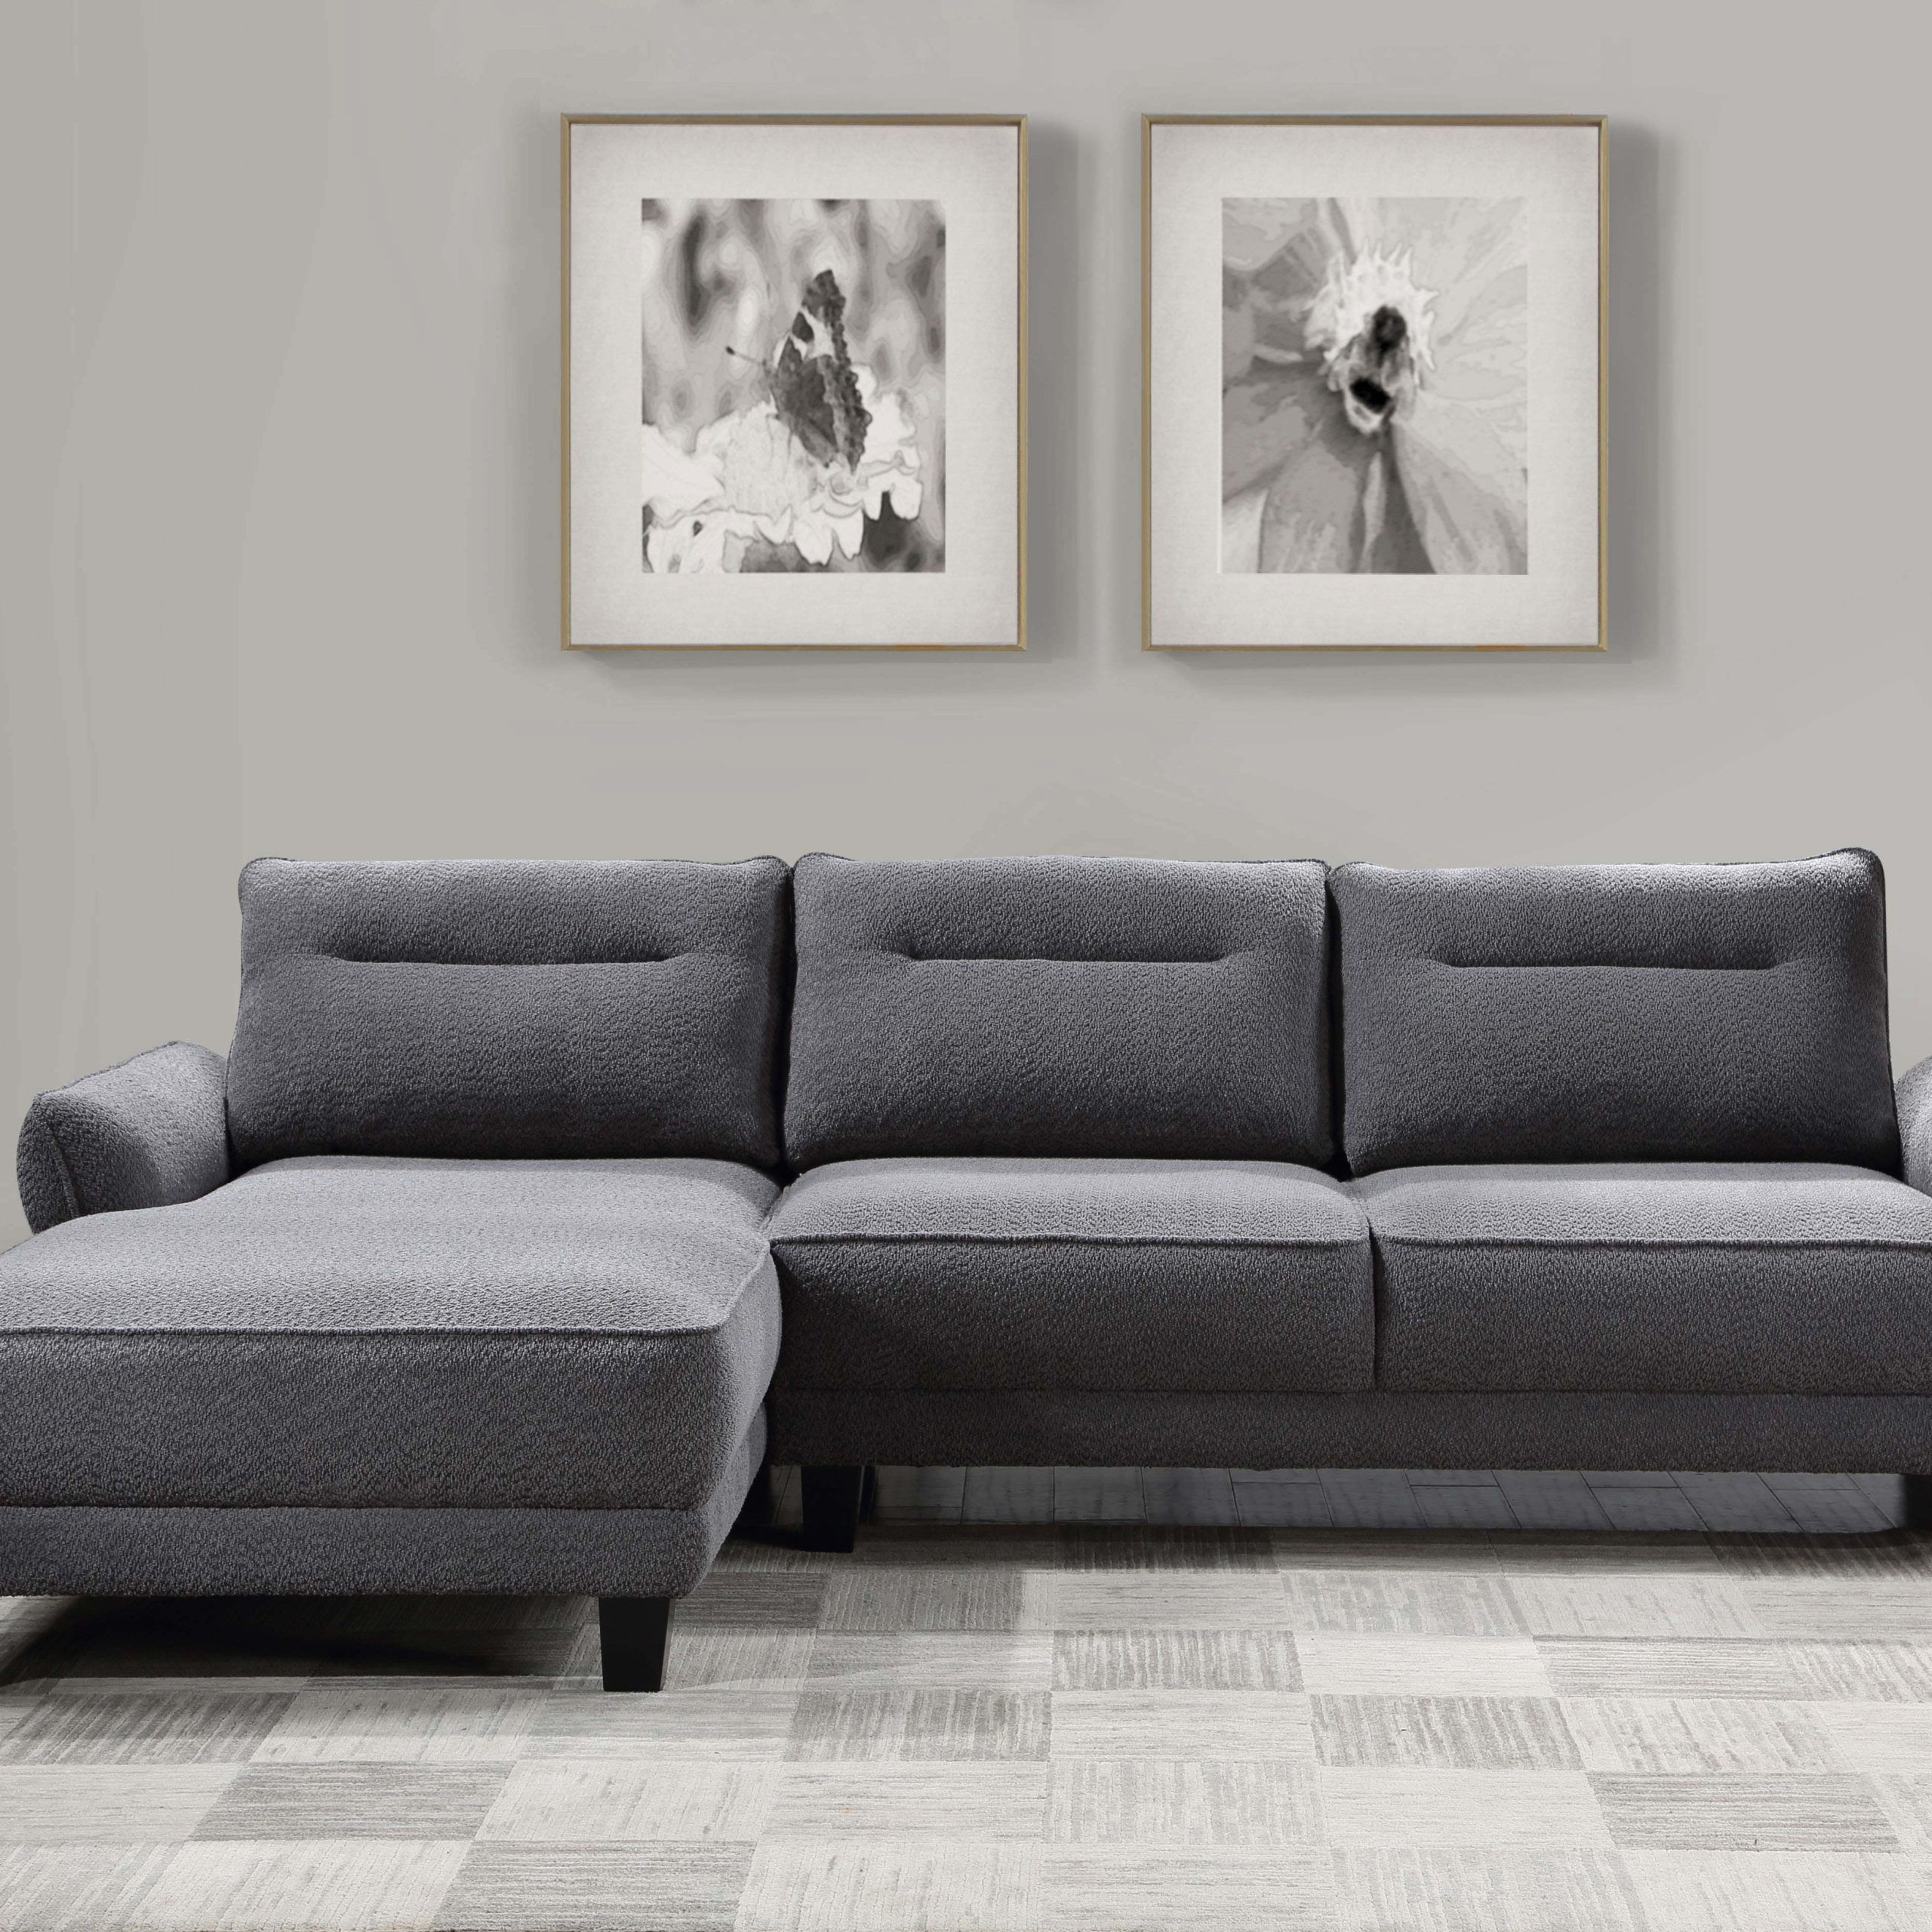 Caspian Upholstered Curved Arms Sectional Sofa Grey – Coaste Regarding Sofas With Curved Arms (View 6 of 15)